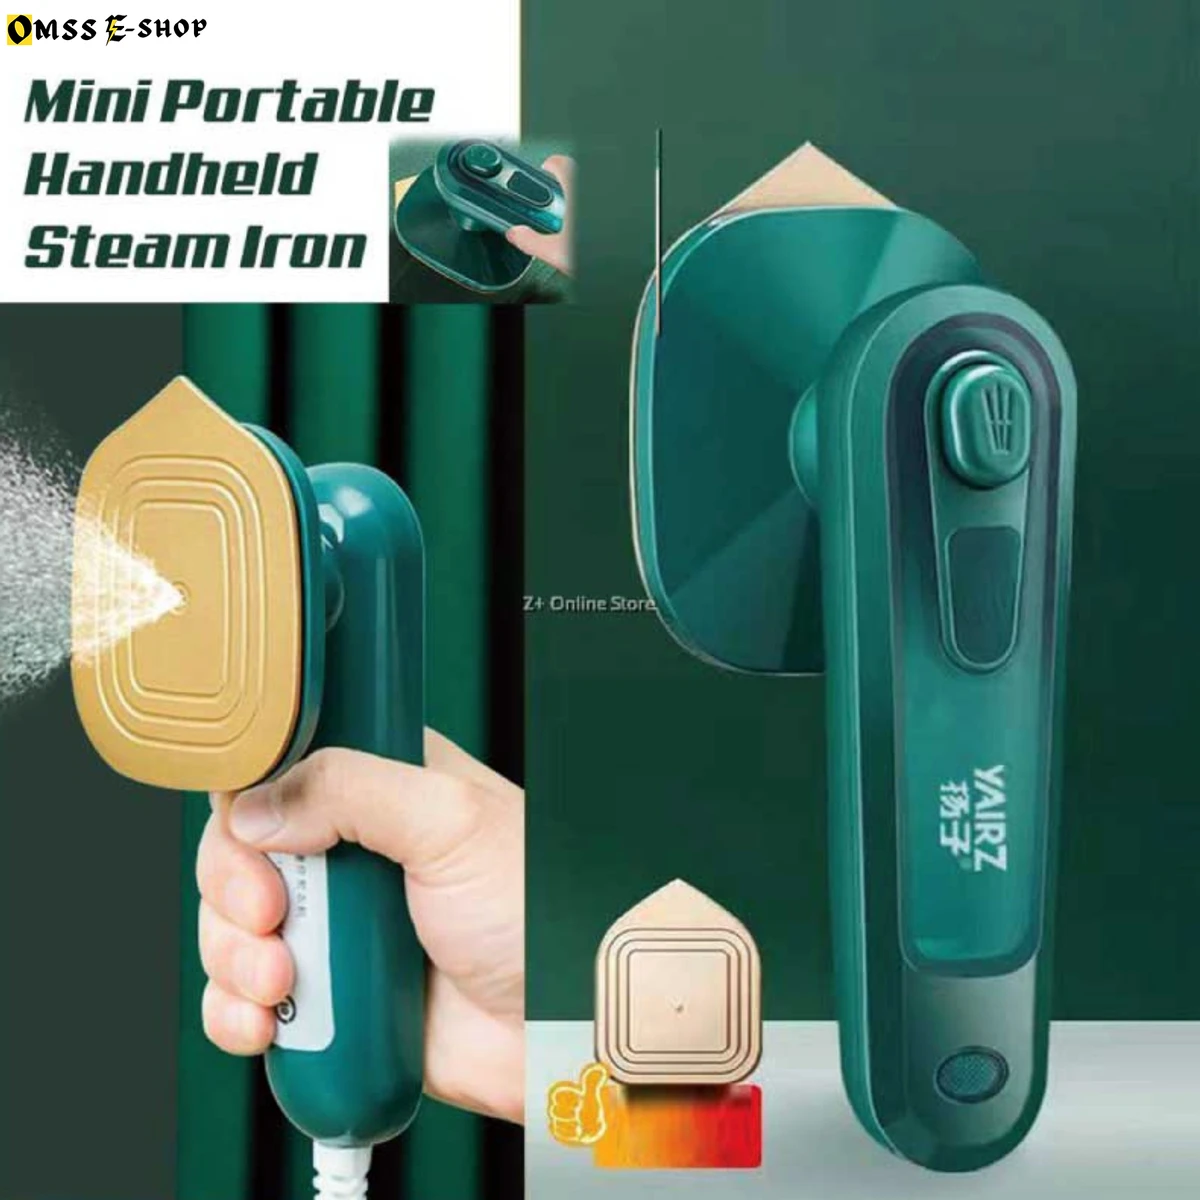 Professional Micro Steam Iron 3-in-1 Upgrade Handheld Steam Iron Small Portable Steam Iron with Integrated Water Tank Dry & Wet Quick Ironing Cleaning Clothing Wrinkles Removal (Dark Green)